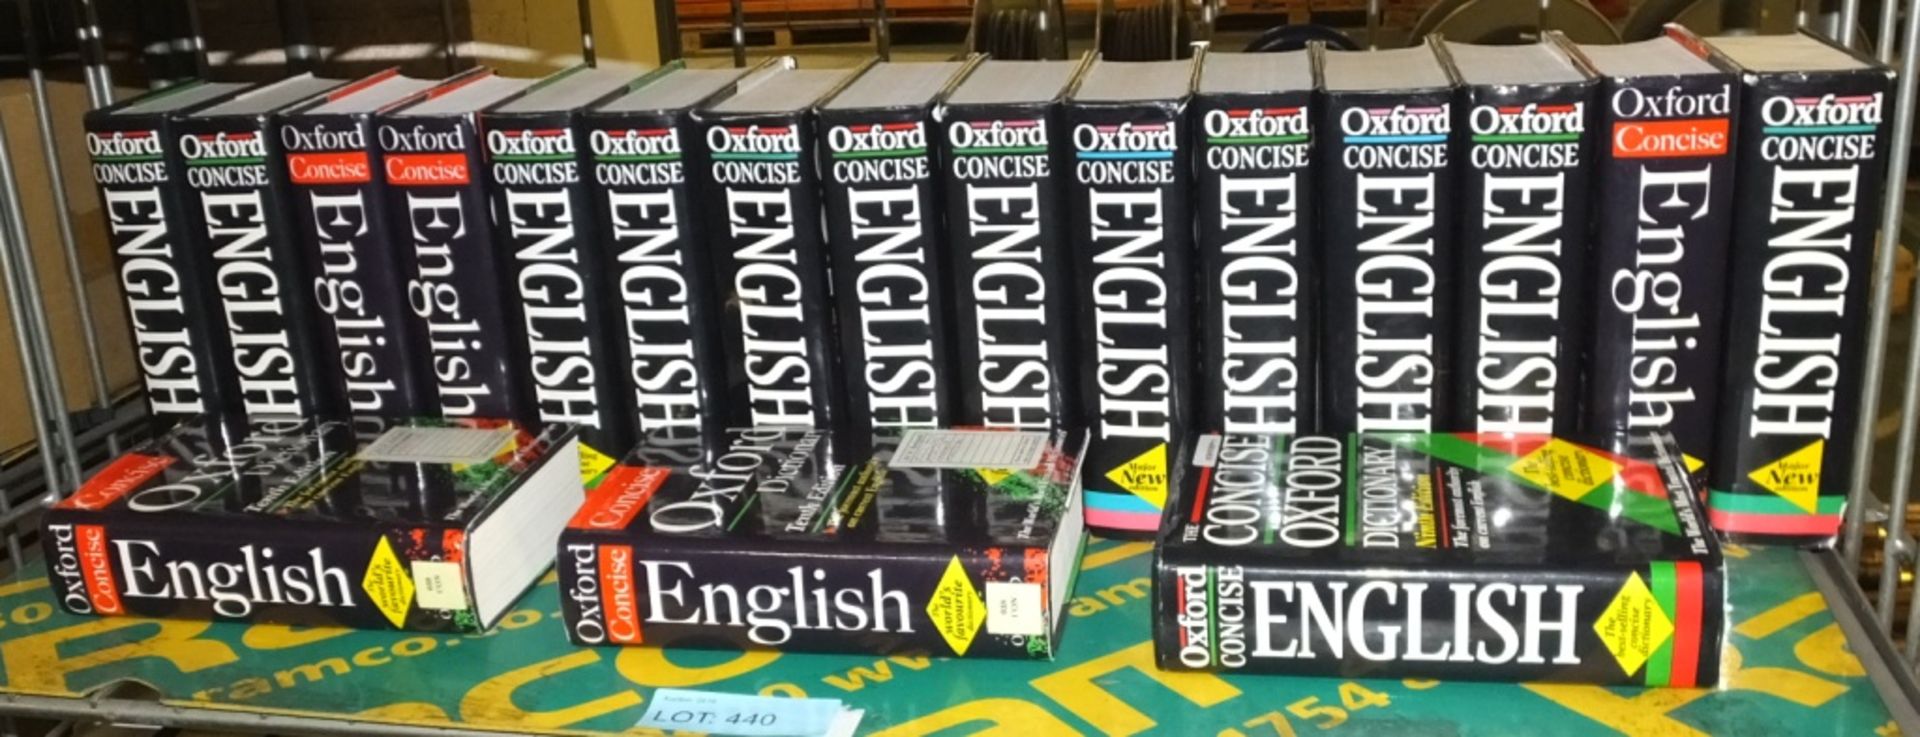 18x Concise Oxford Dictionaries - H.W.Fowler